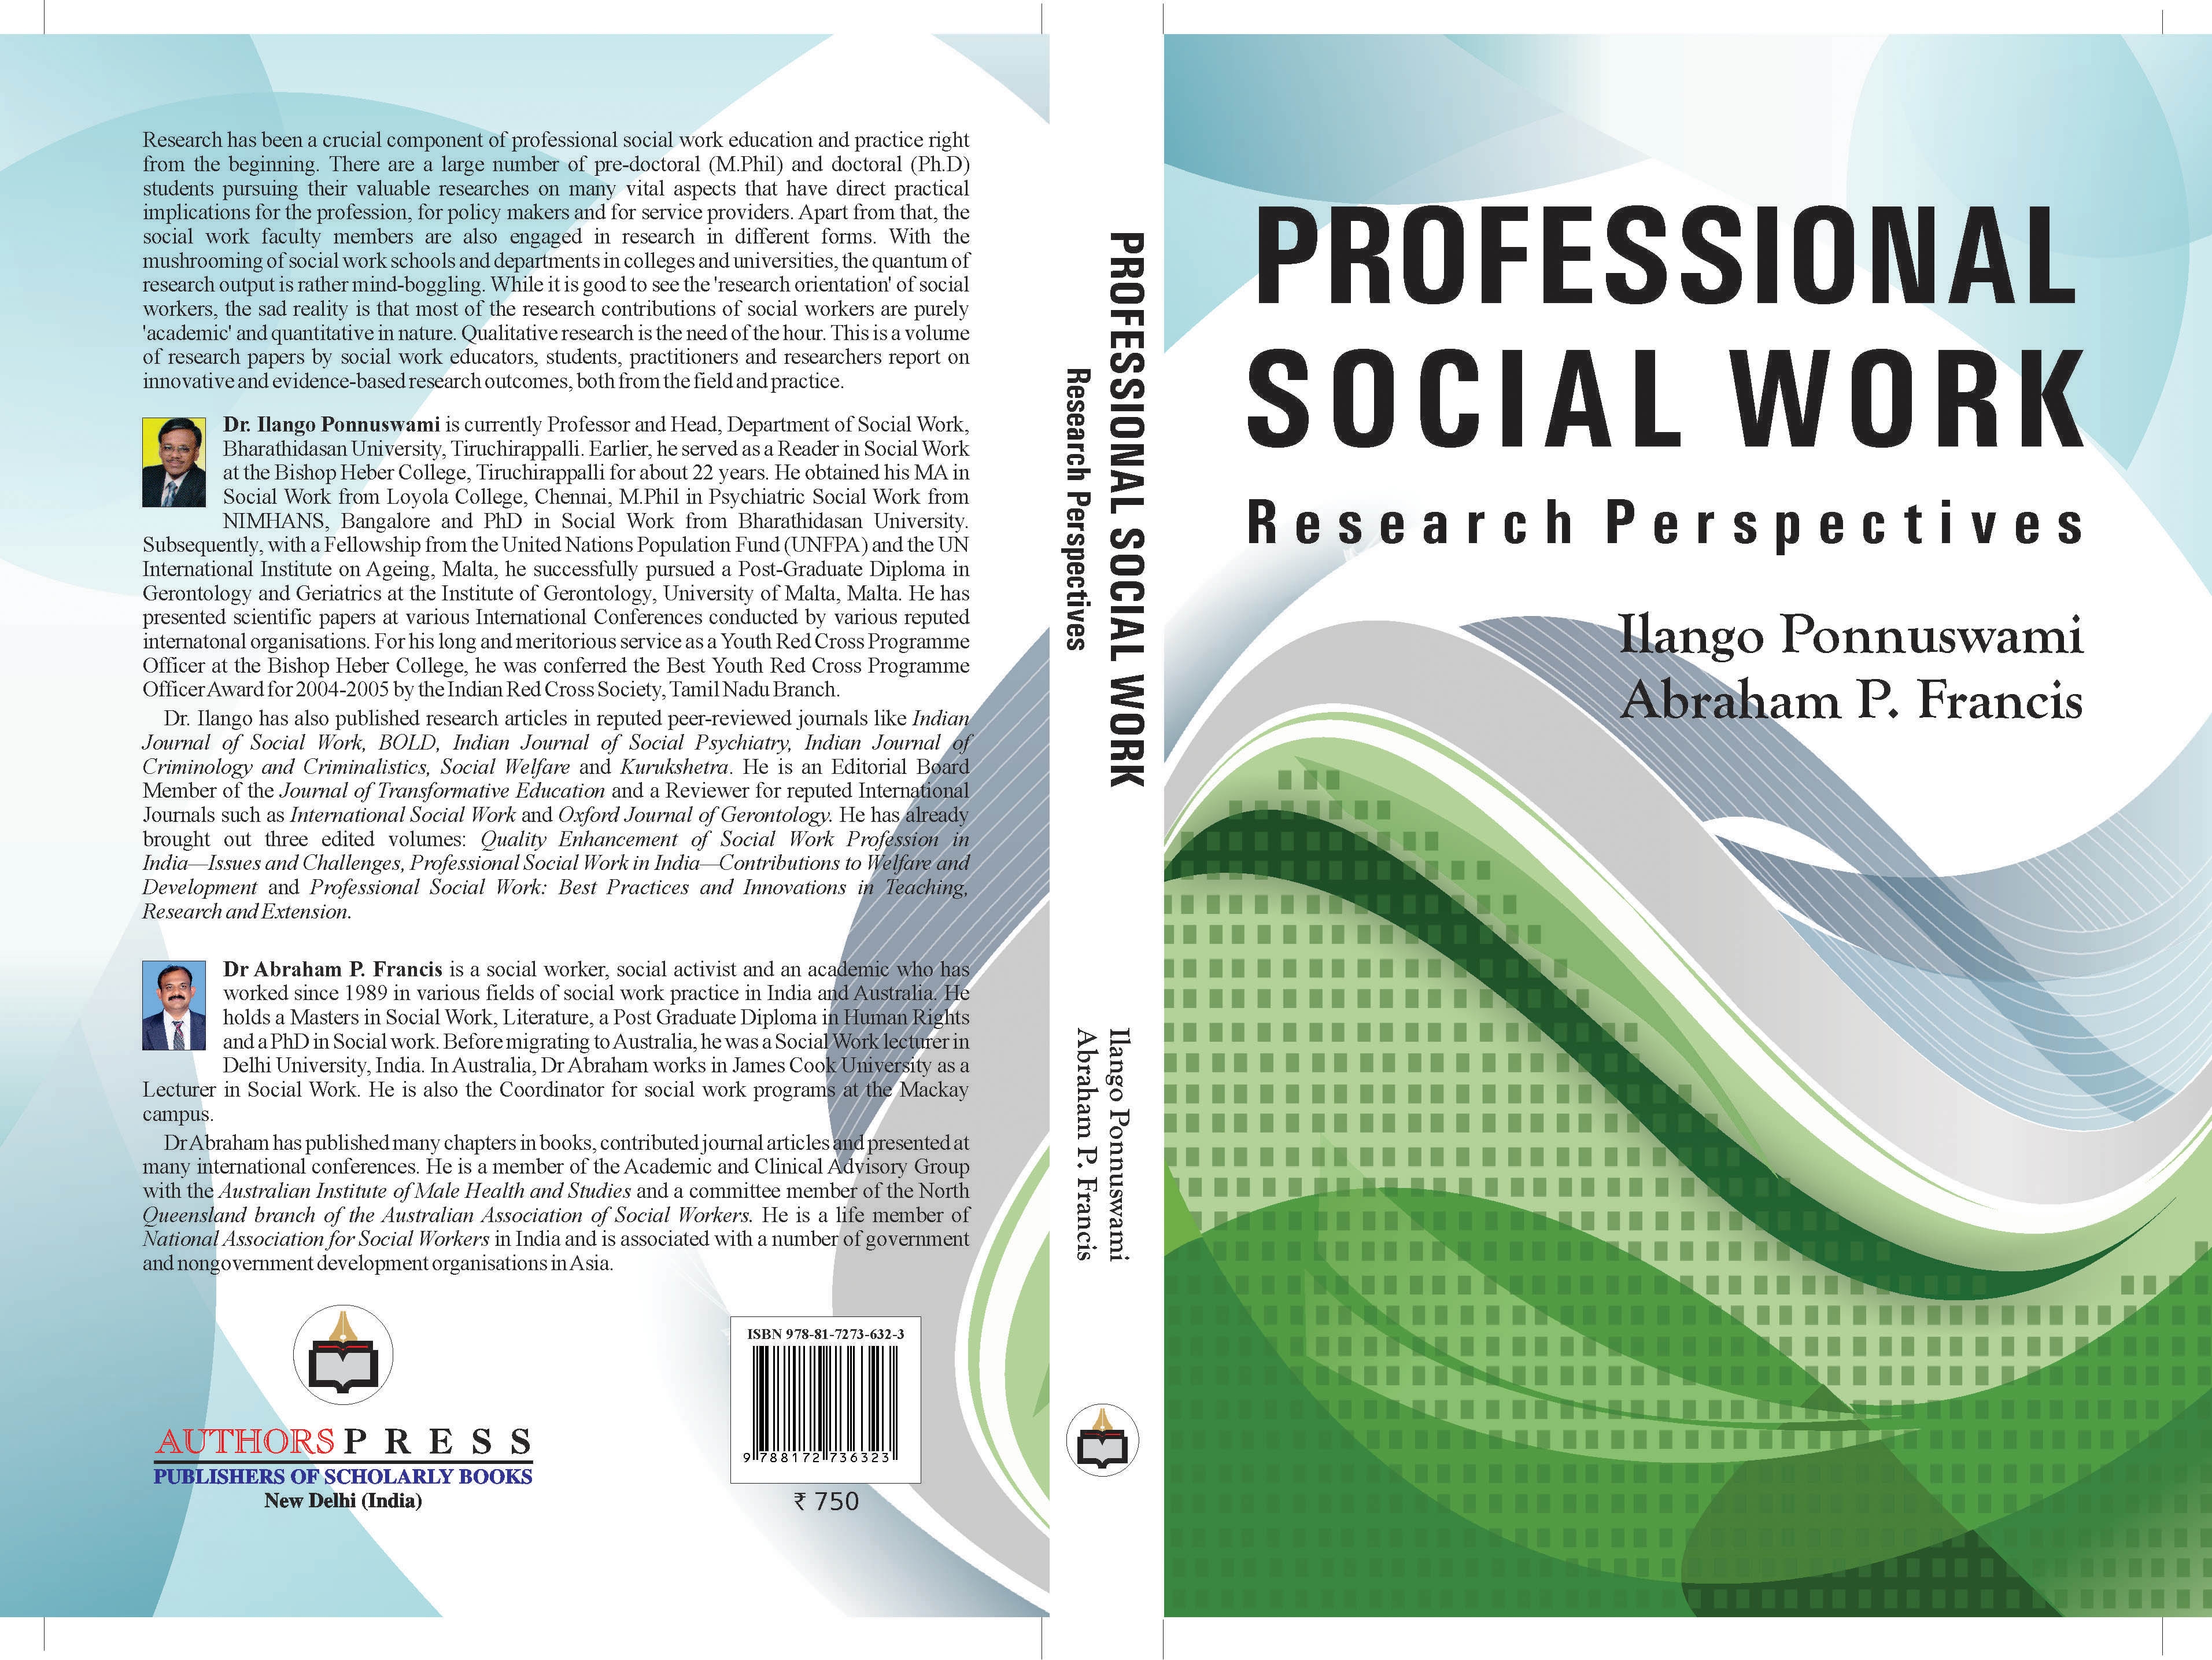 research work on social work